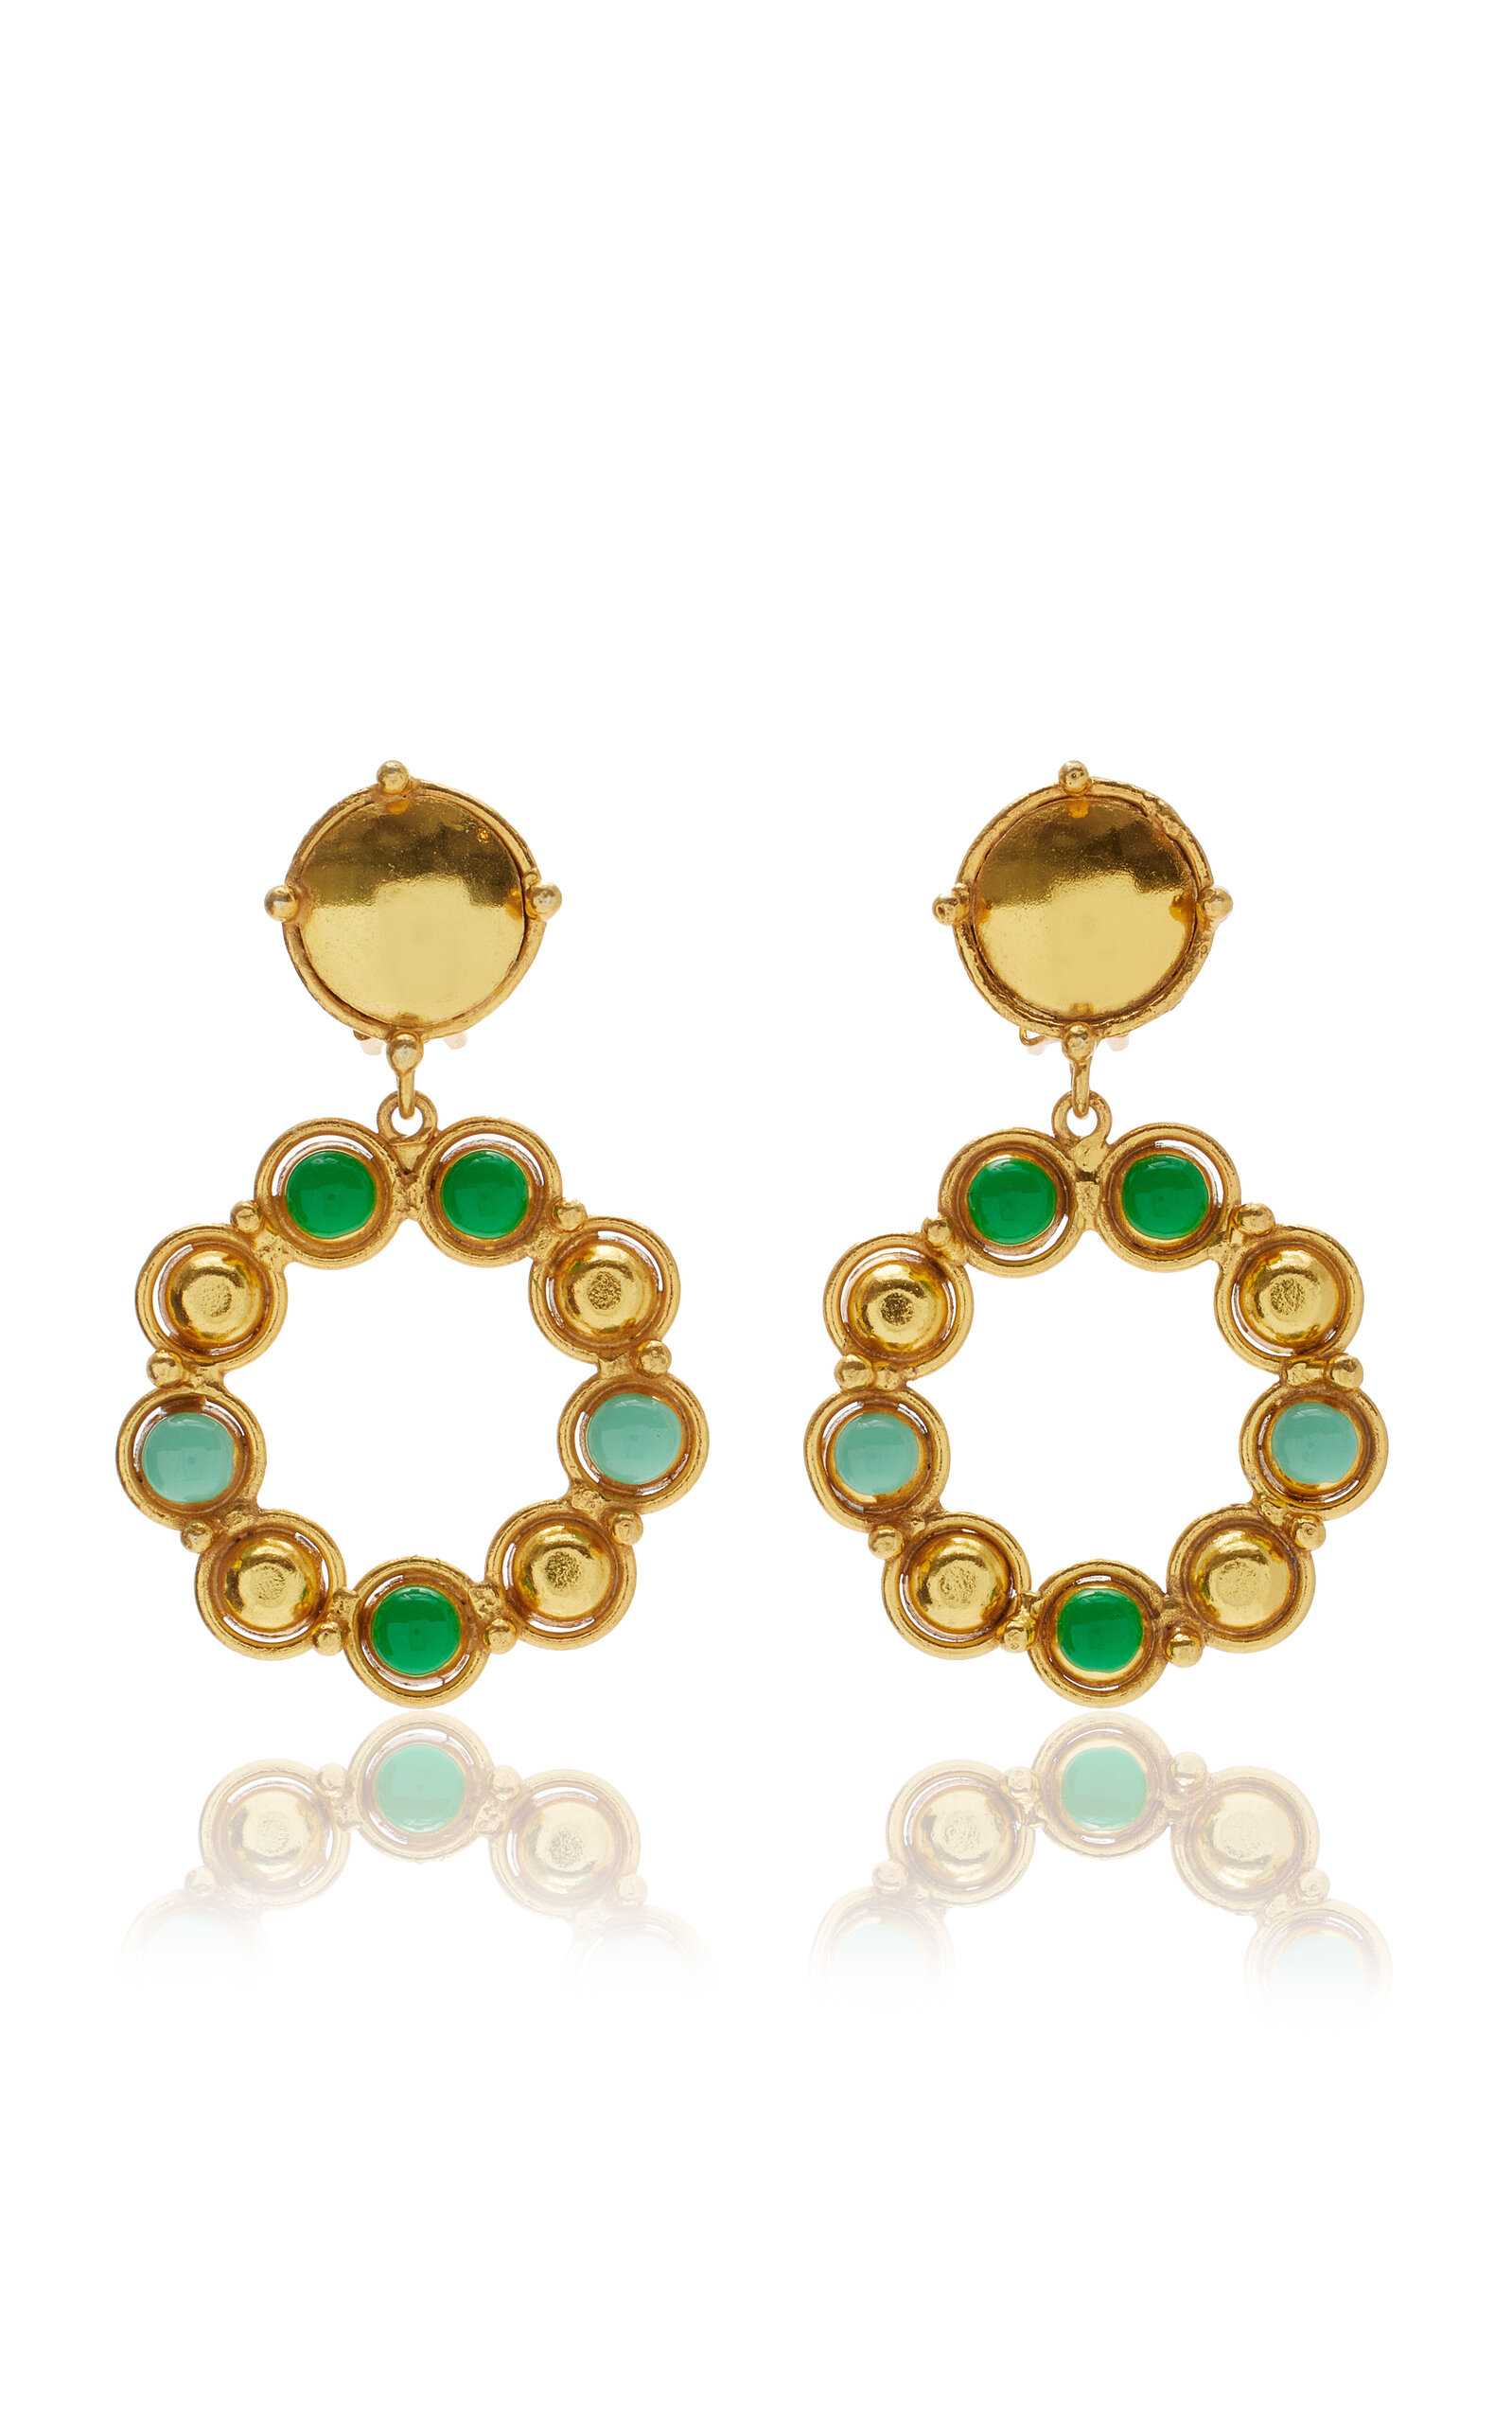 Sylvia Toledano Flower Candies 22k Gold-plated And Enamel Earrings In Green